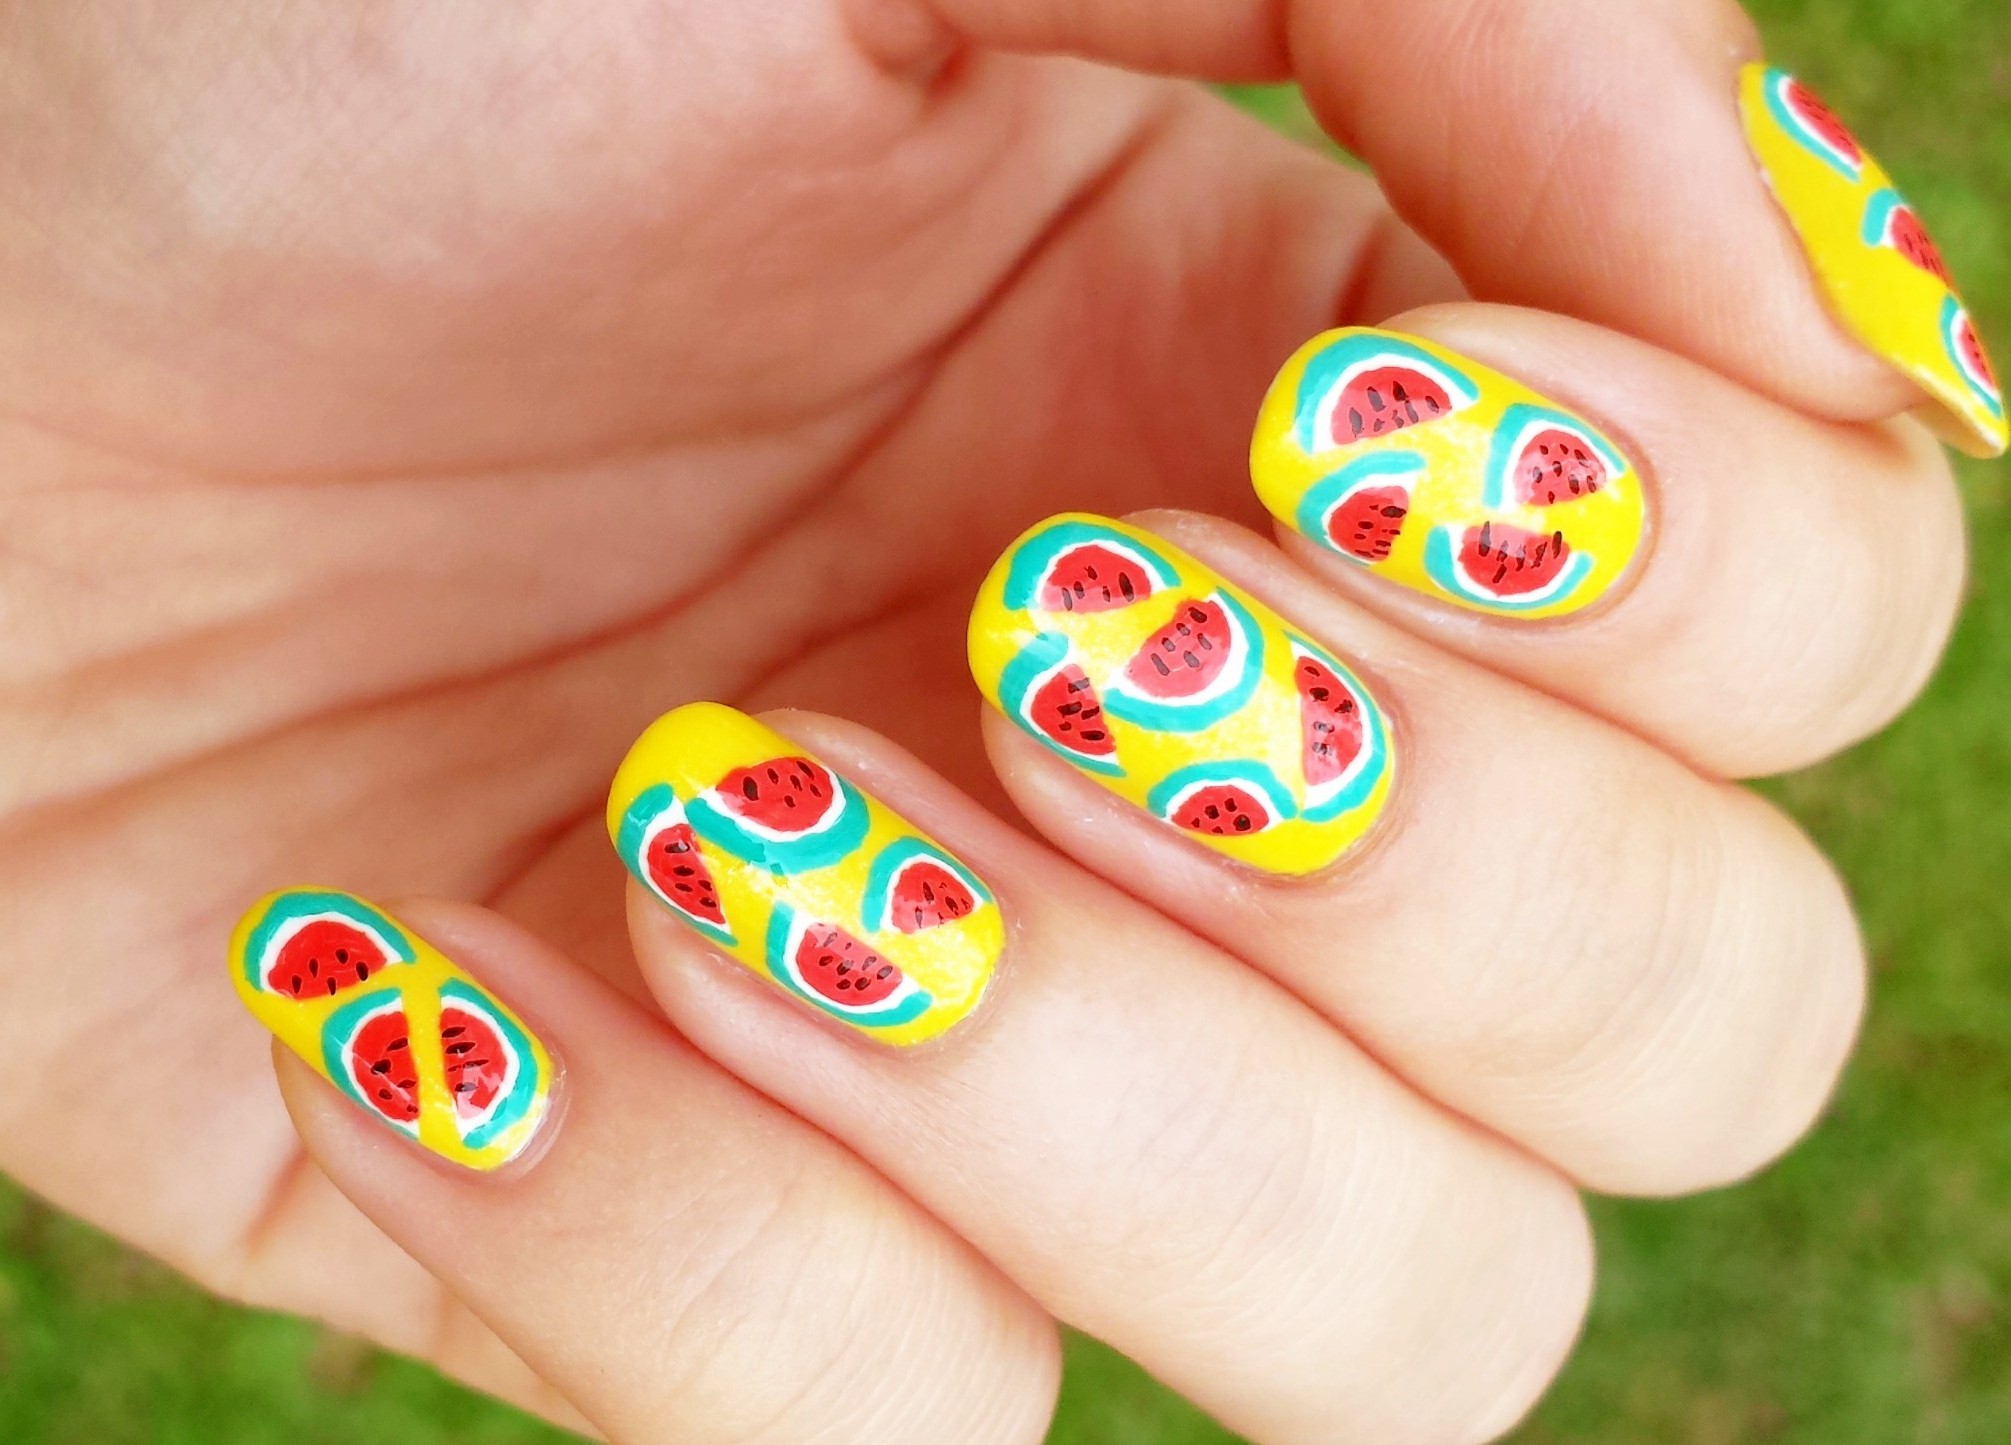 Watermelon Nails Are The Runaway Summer Manicure Trend